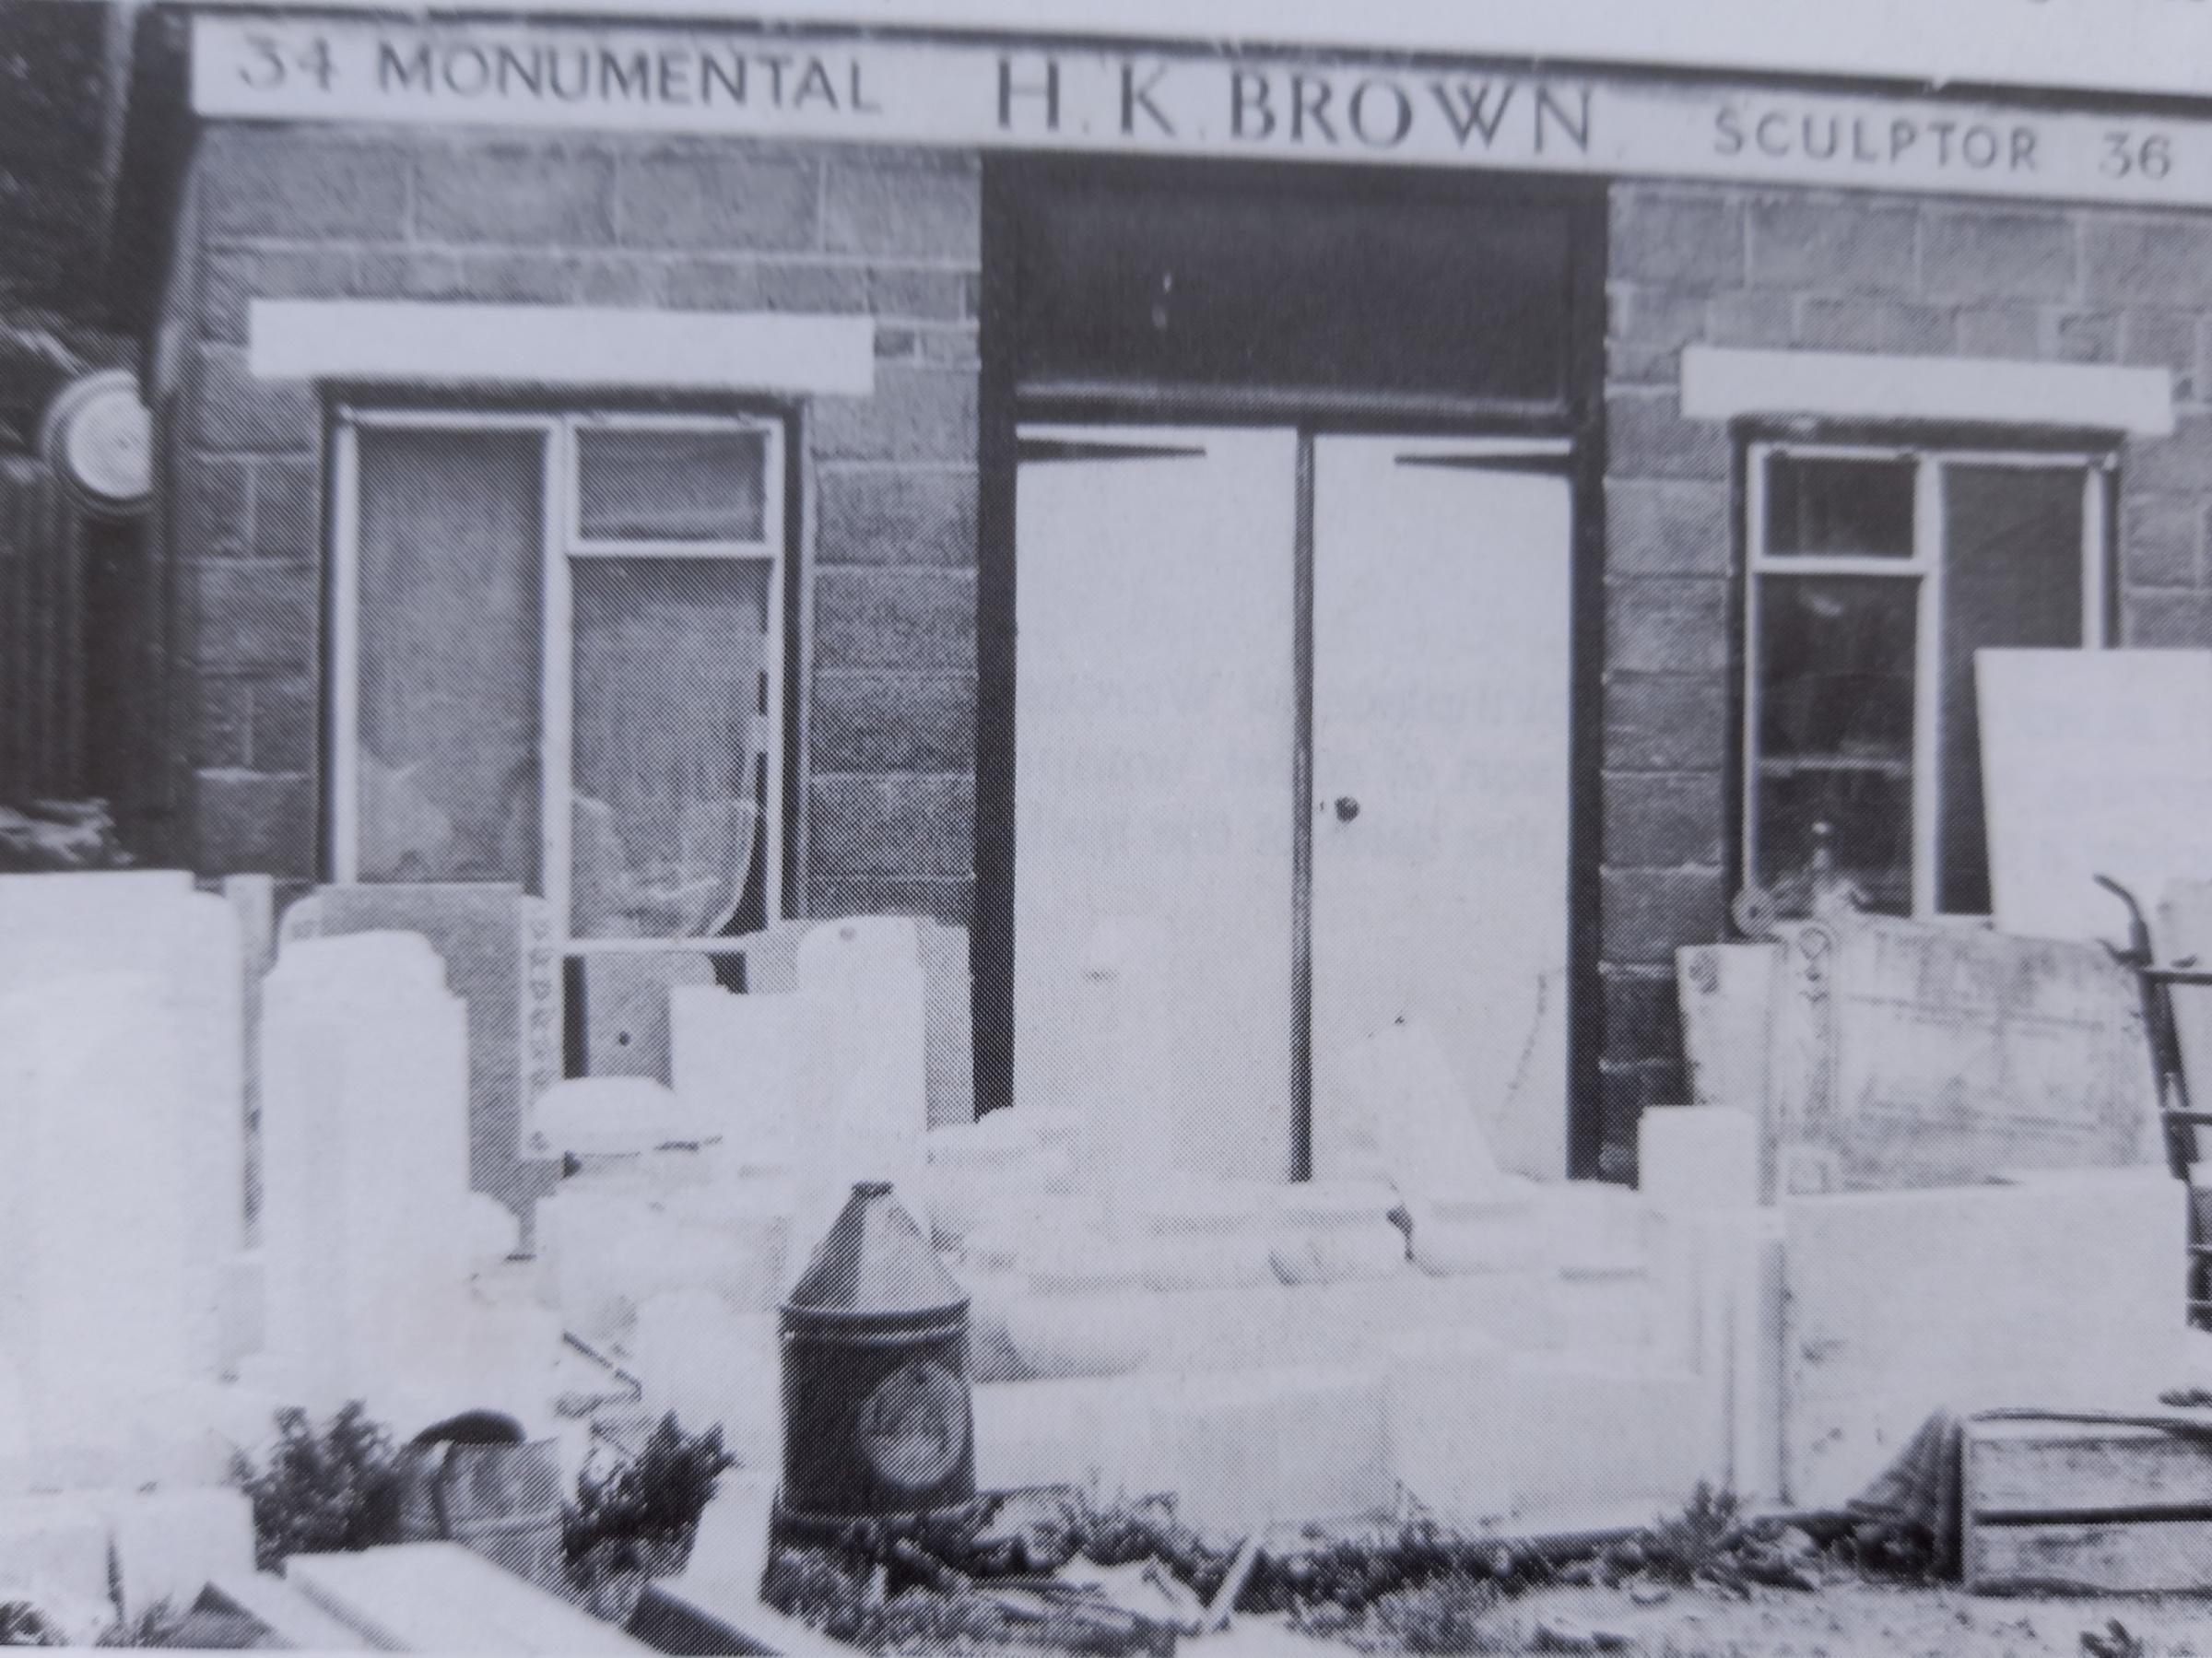 The premises of HK Brown could probably have erected a monument to the death of Silver Street